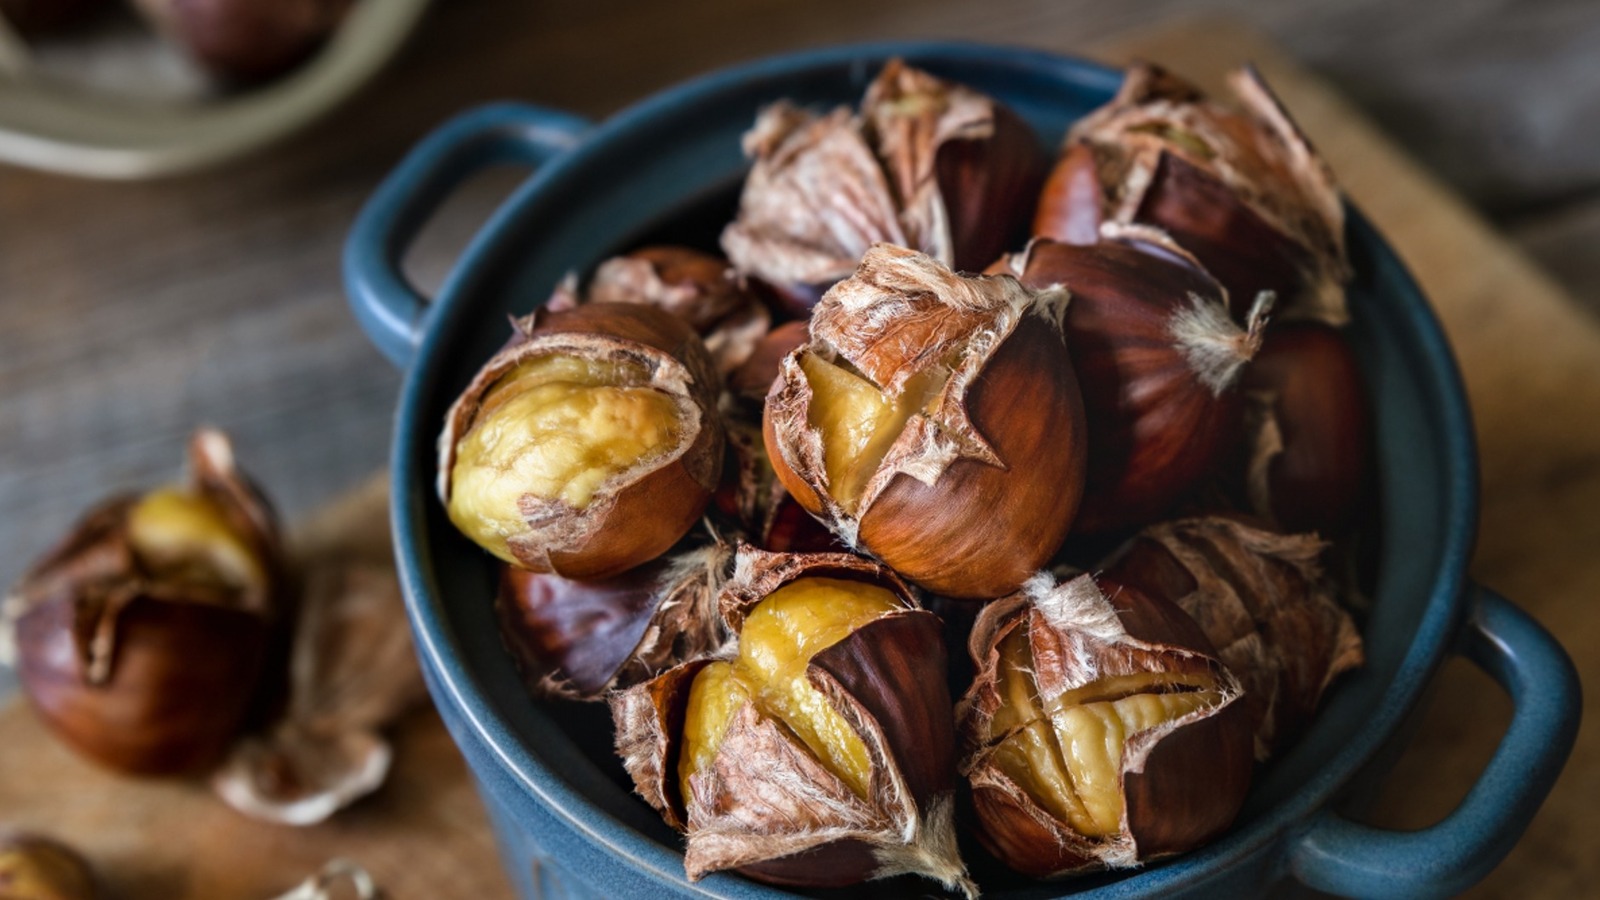 https://www.tastingtable.com/img/gallery/the-reason-youll-want-to-score-chestnuts-before-roasting/l-intro-1693922974.jpg